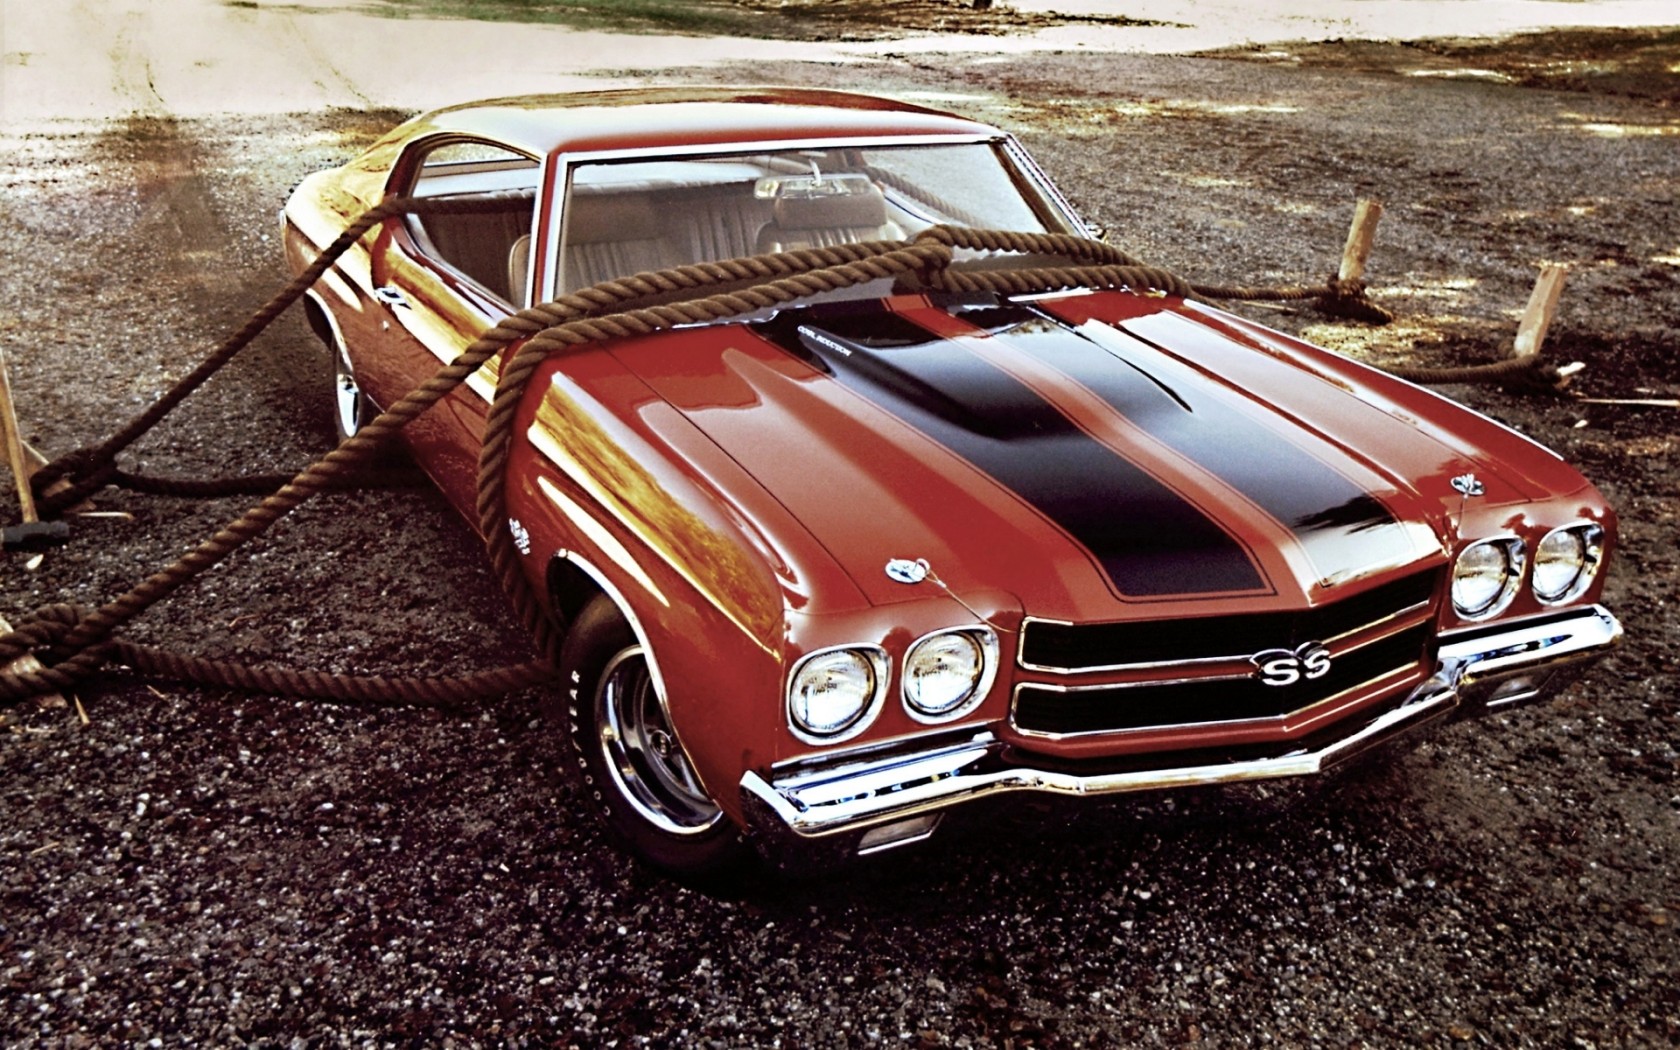 Chevrolet Chevelle SS Wallpaper and Background Image 1680x1050 1680x1050